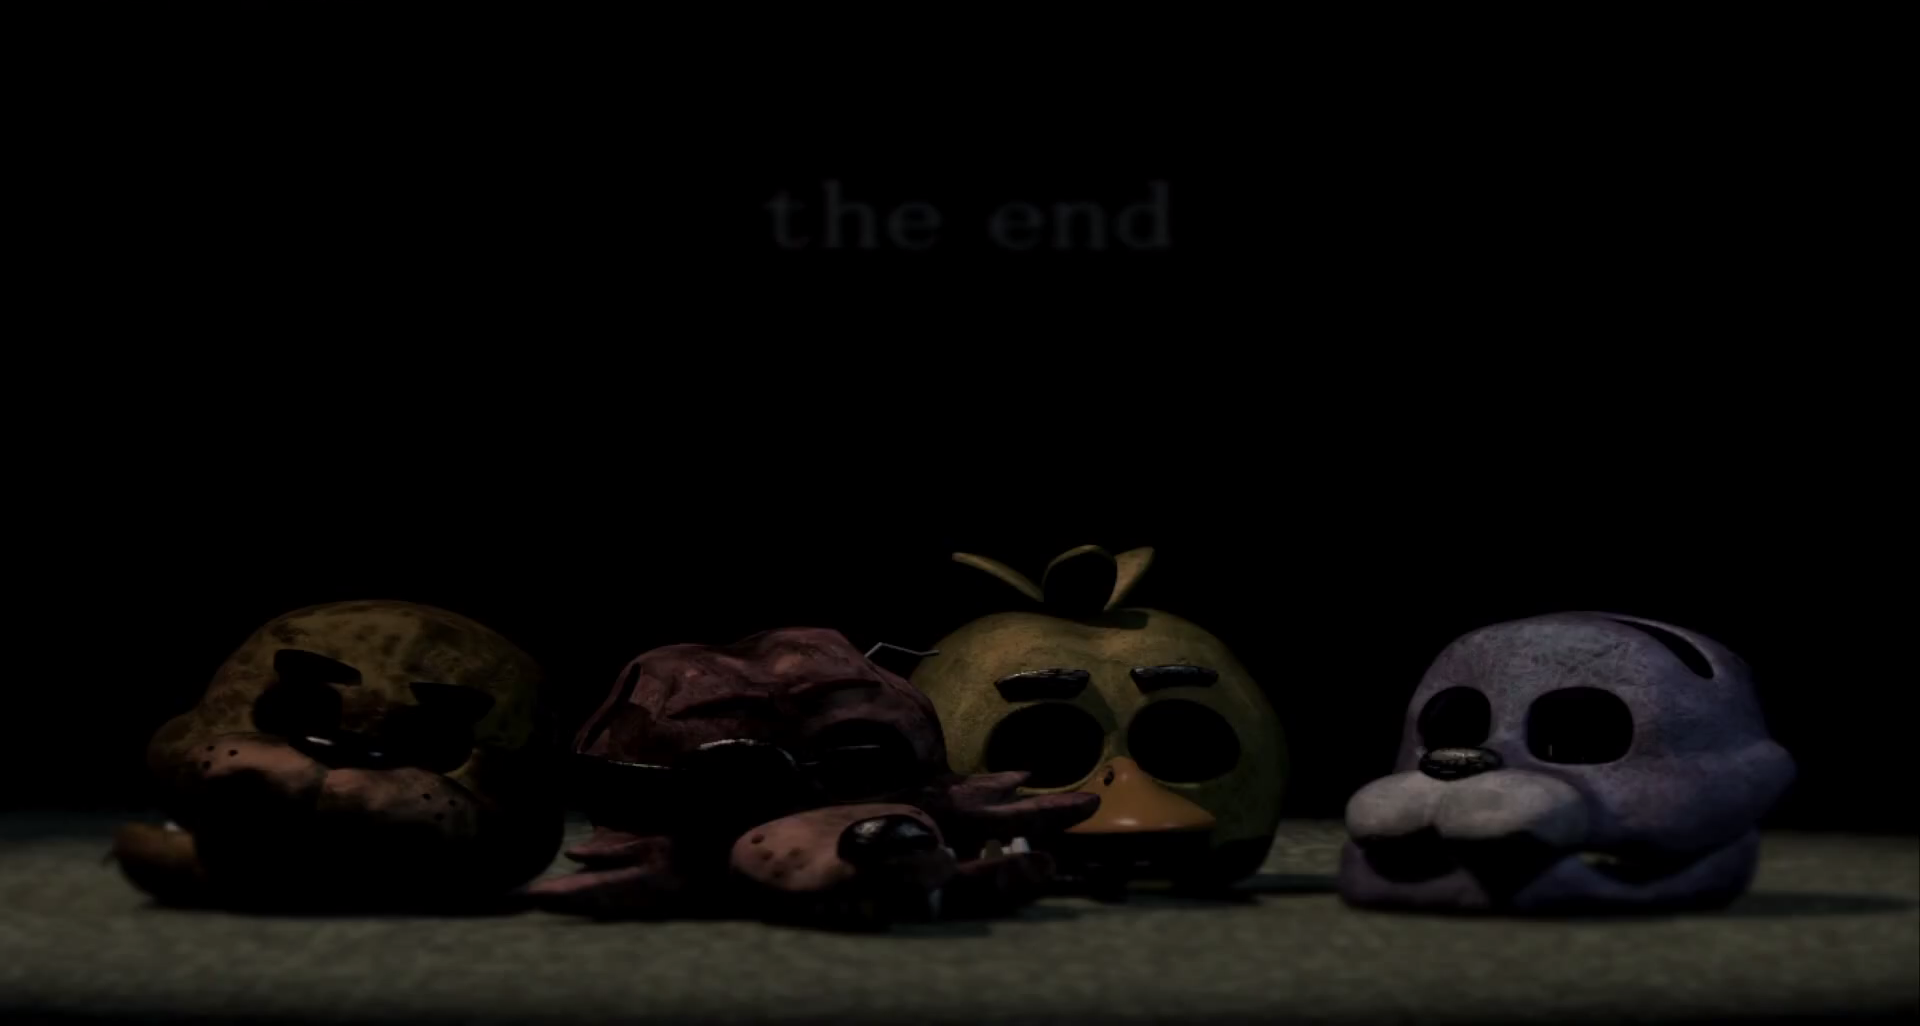 Five Nights At Freddy's 4The Final Chapter